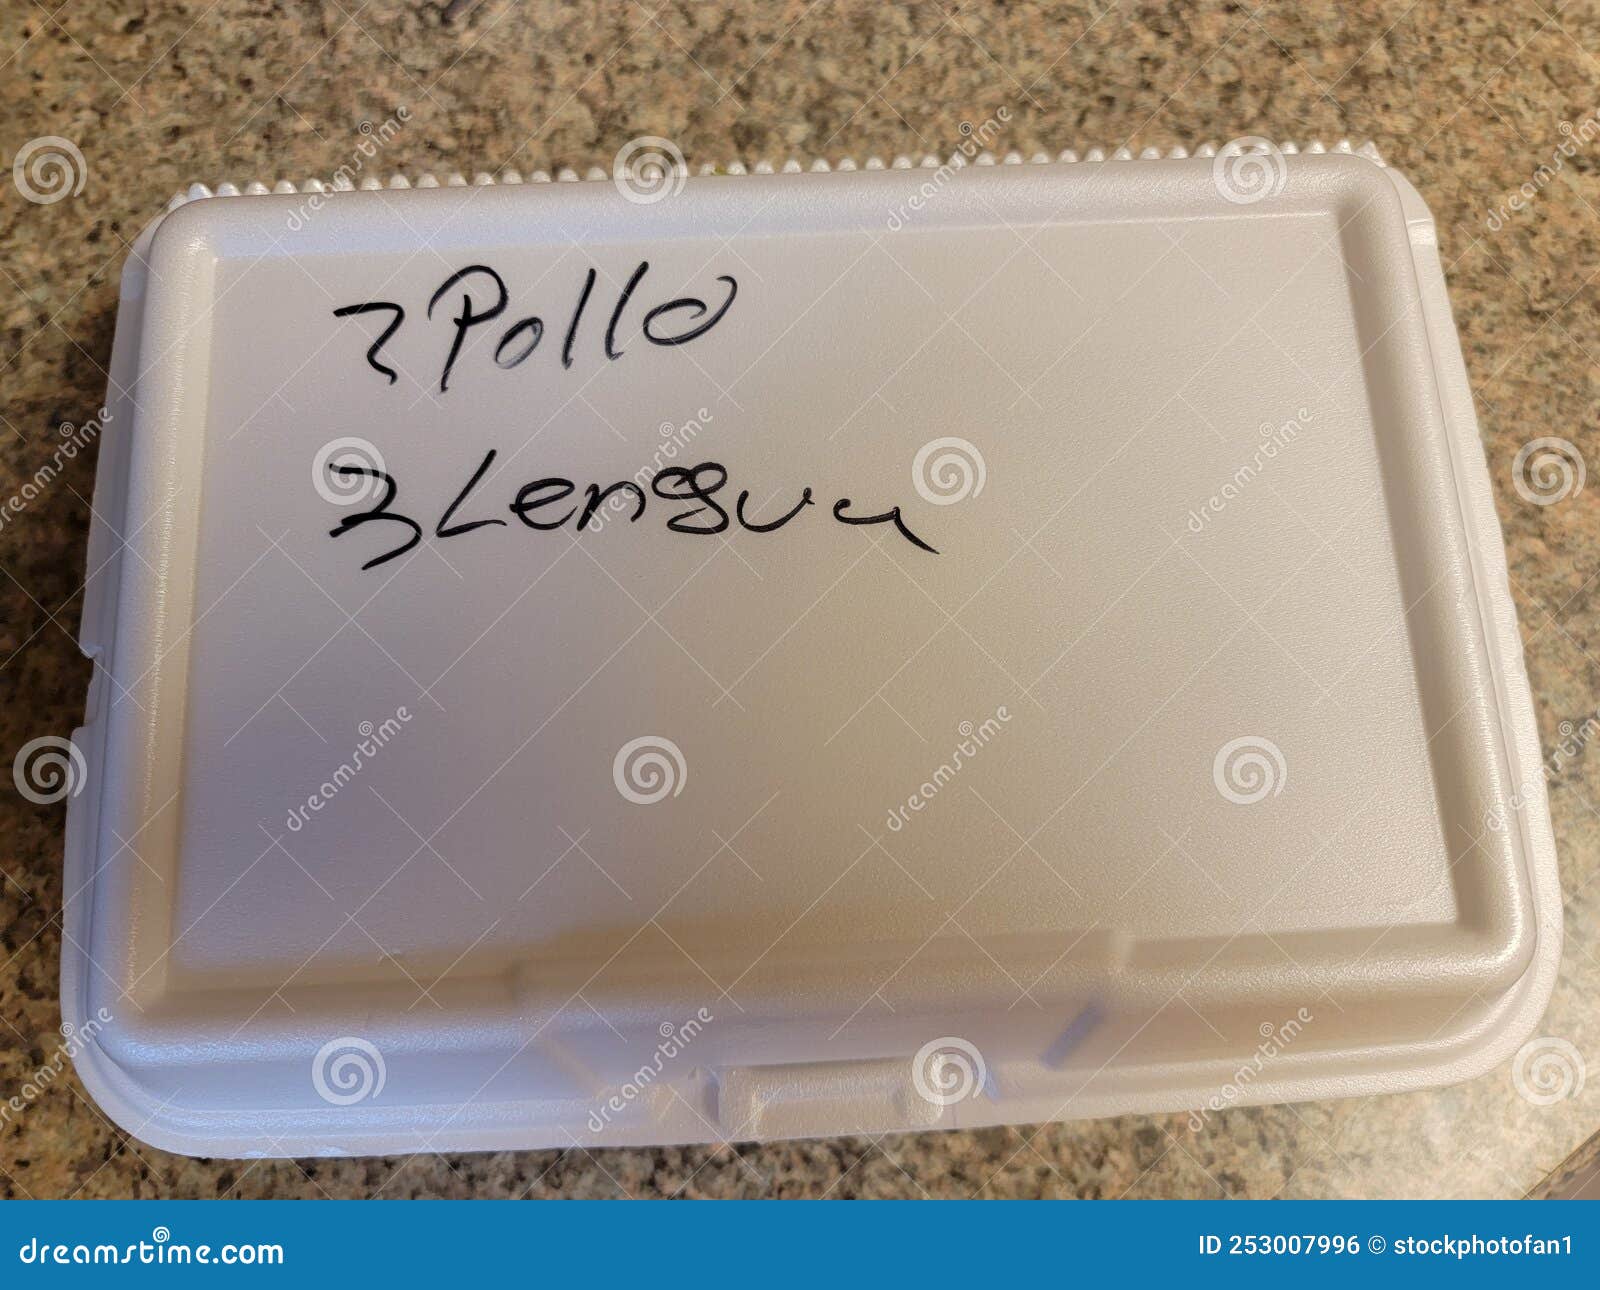 mexican food take out box saying 2 pollo chicken and 3 lengua tongue